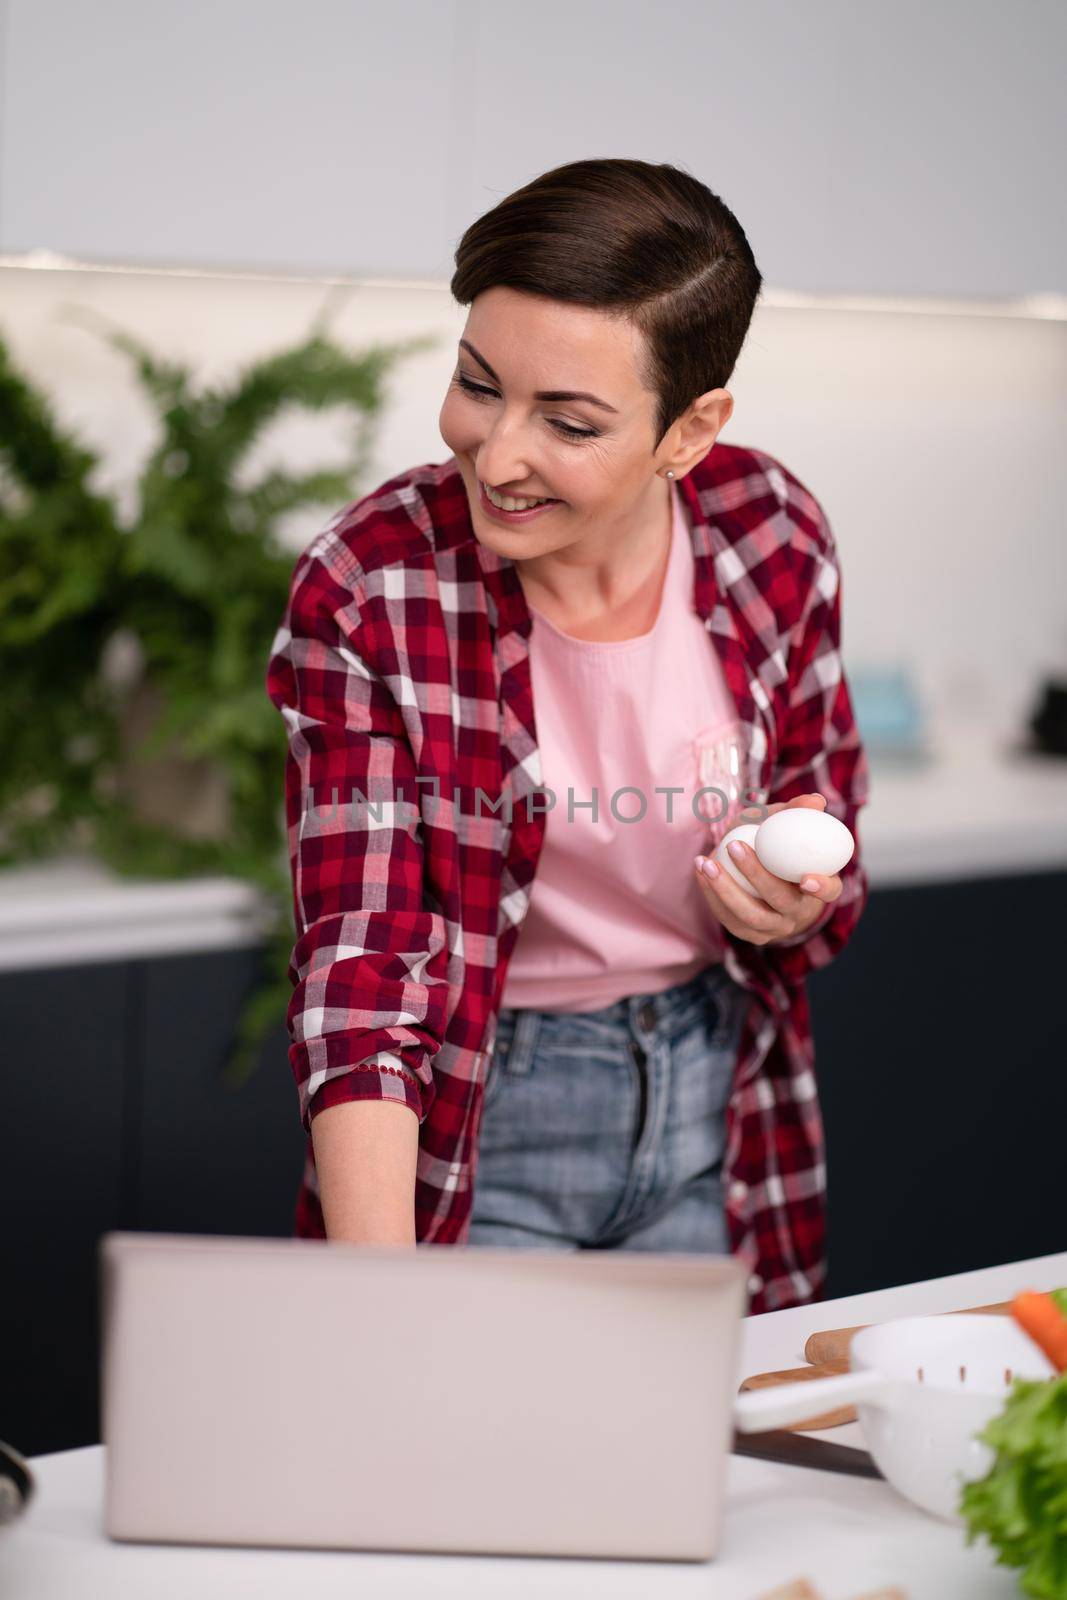 Woman in kitchen using laptop holding eggs in hand smiling while reading recipe or having a video call. Woman in red plaid shirt in modern kitchen interior by LipikStockMedia